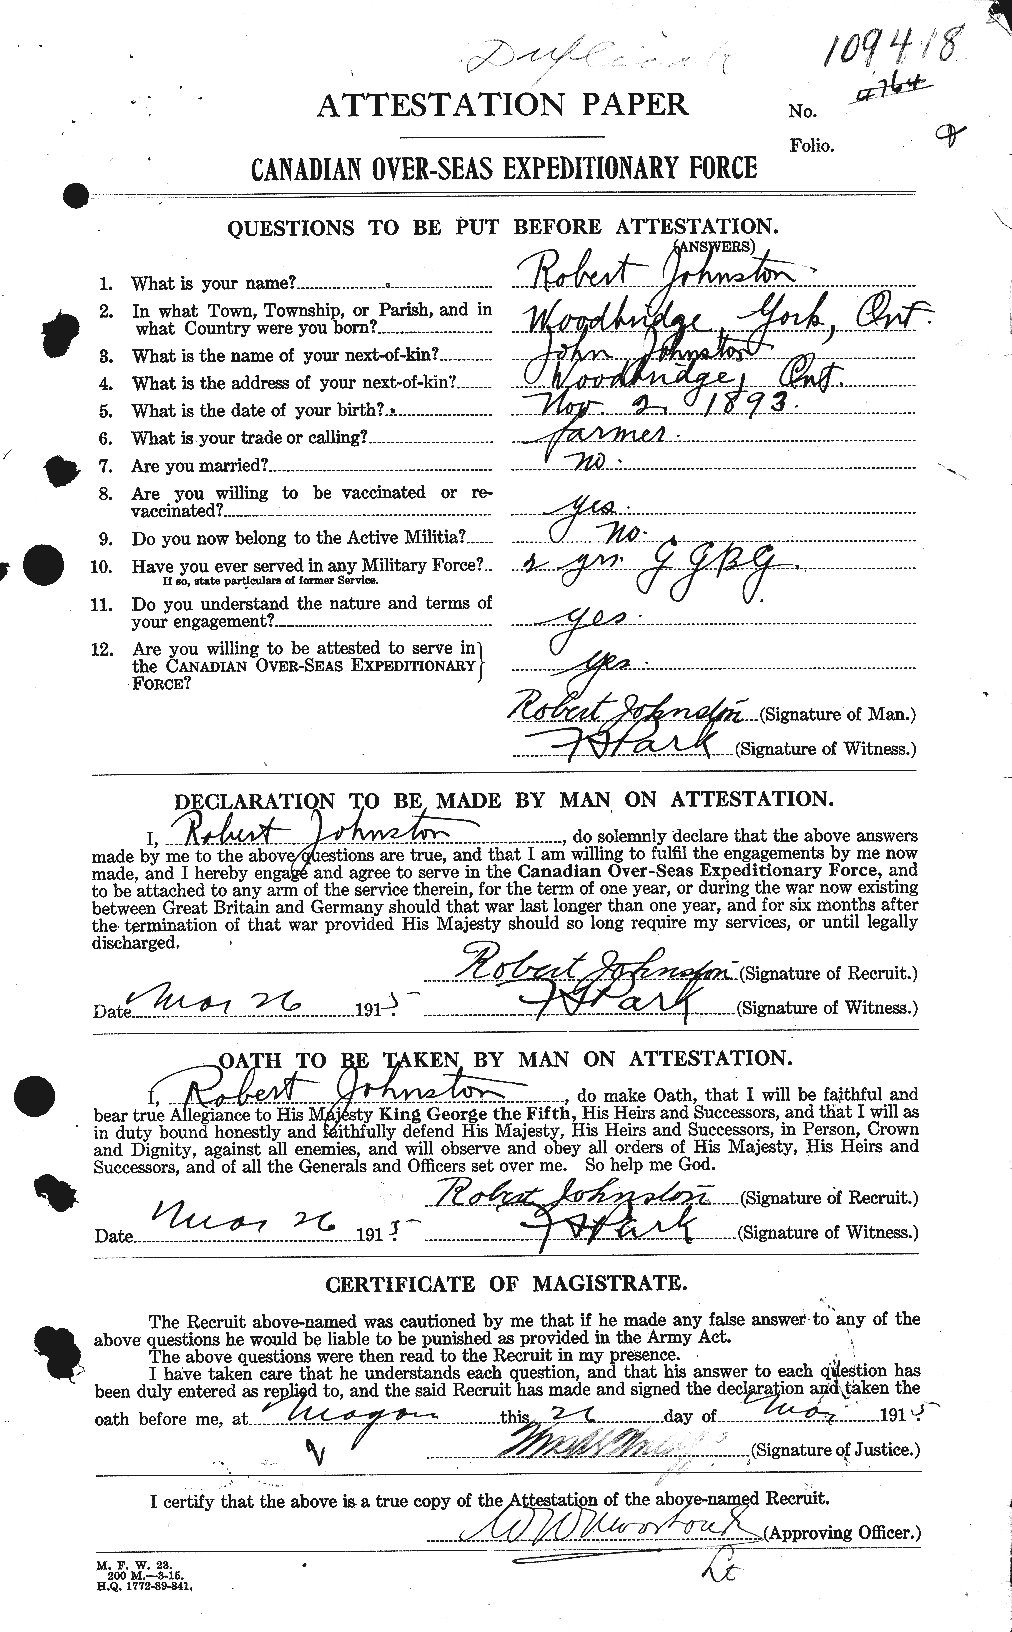 Personnel Records of the First World War - CEF 426975a